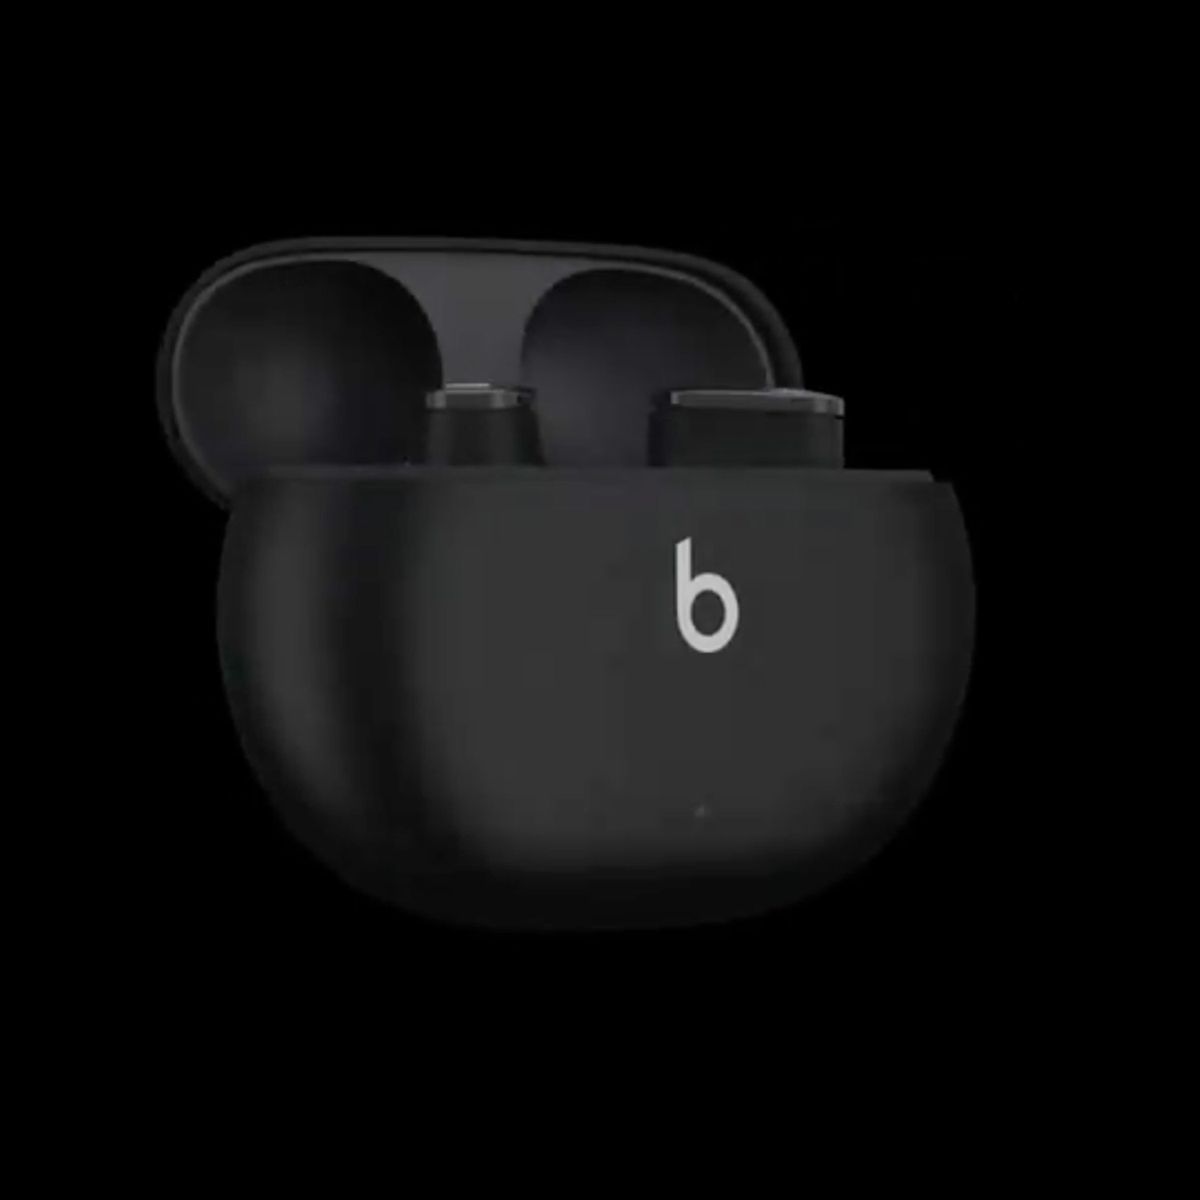 Are These Apple Beats's Next New Wireless